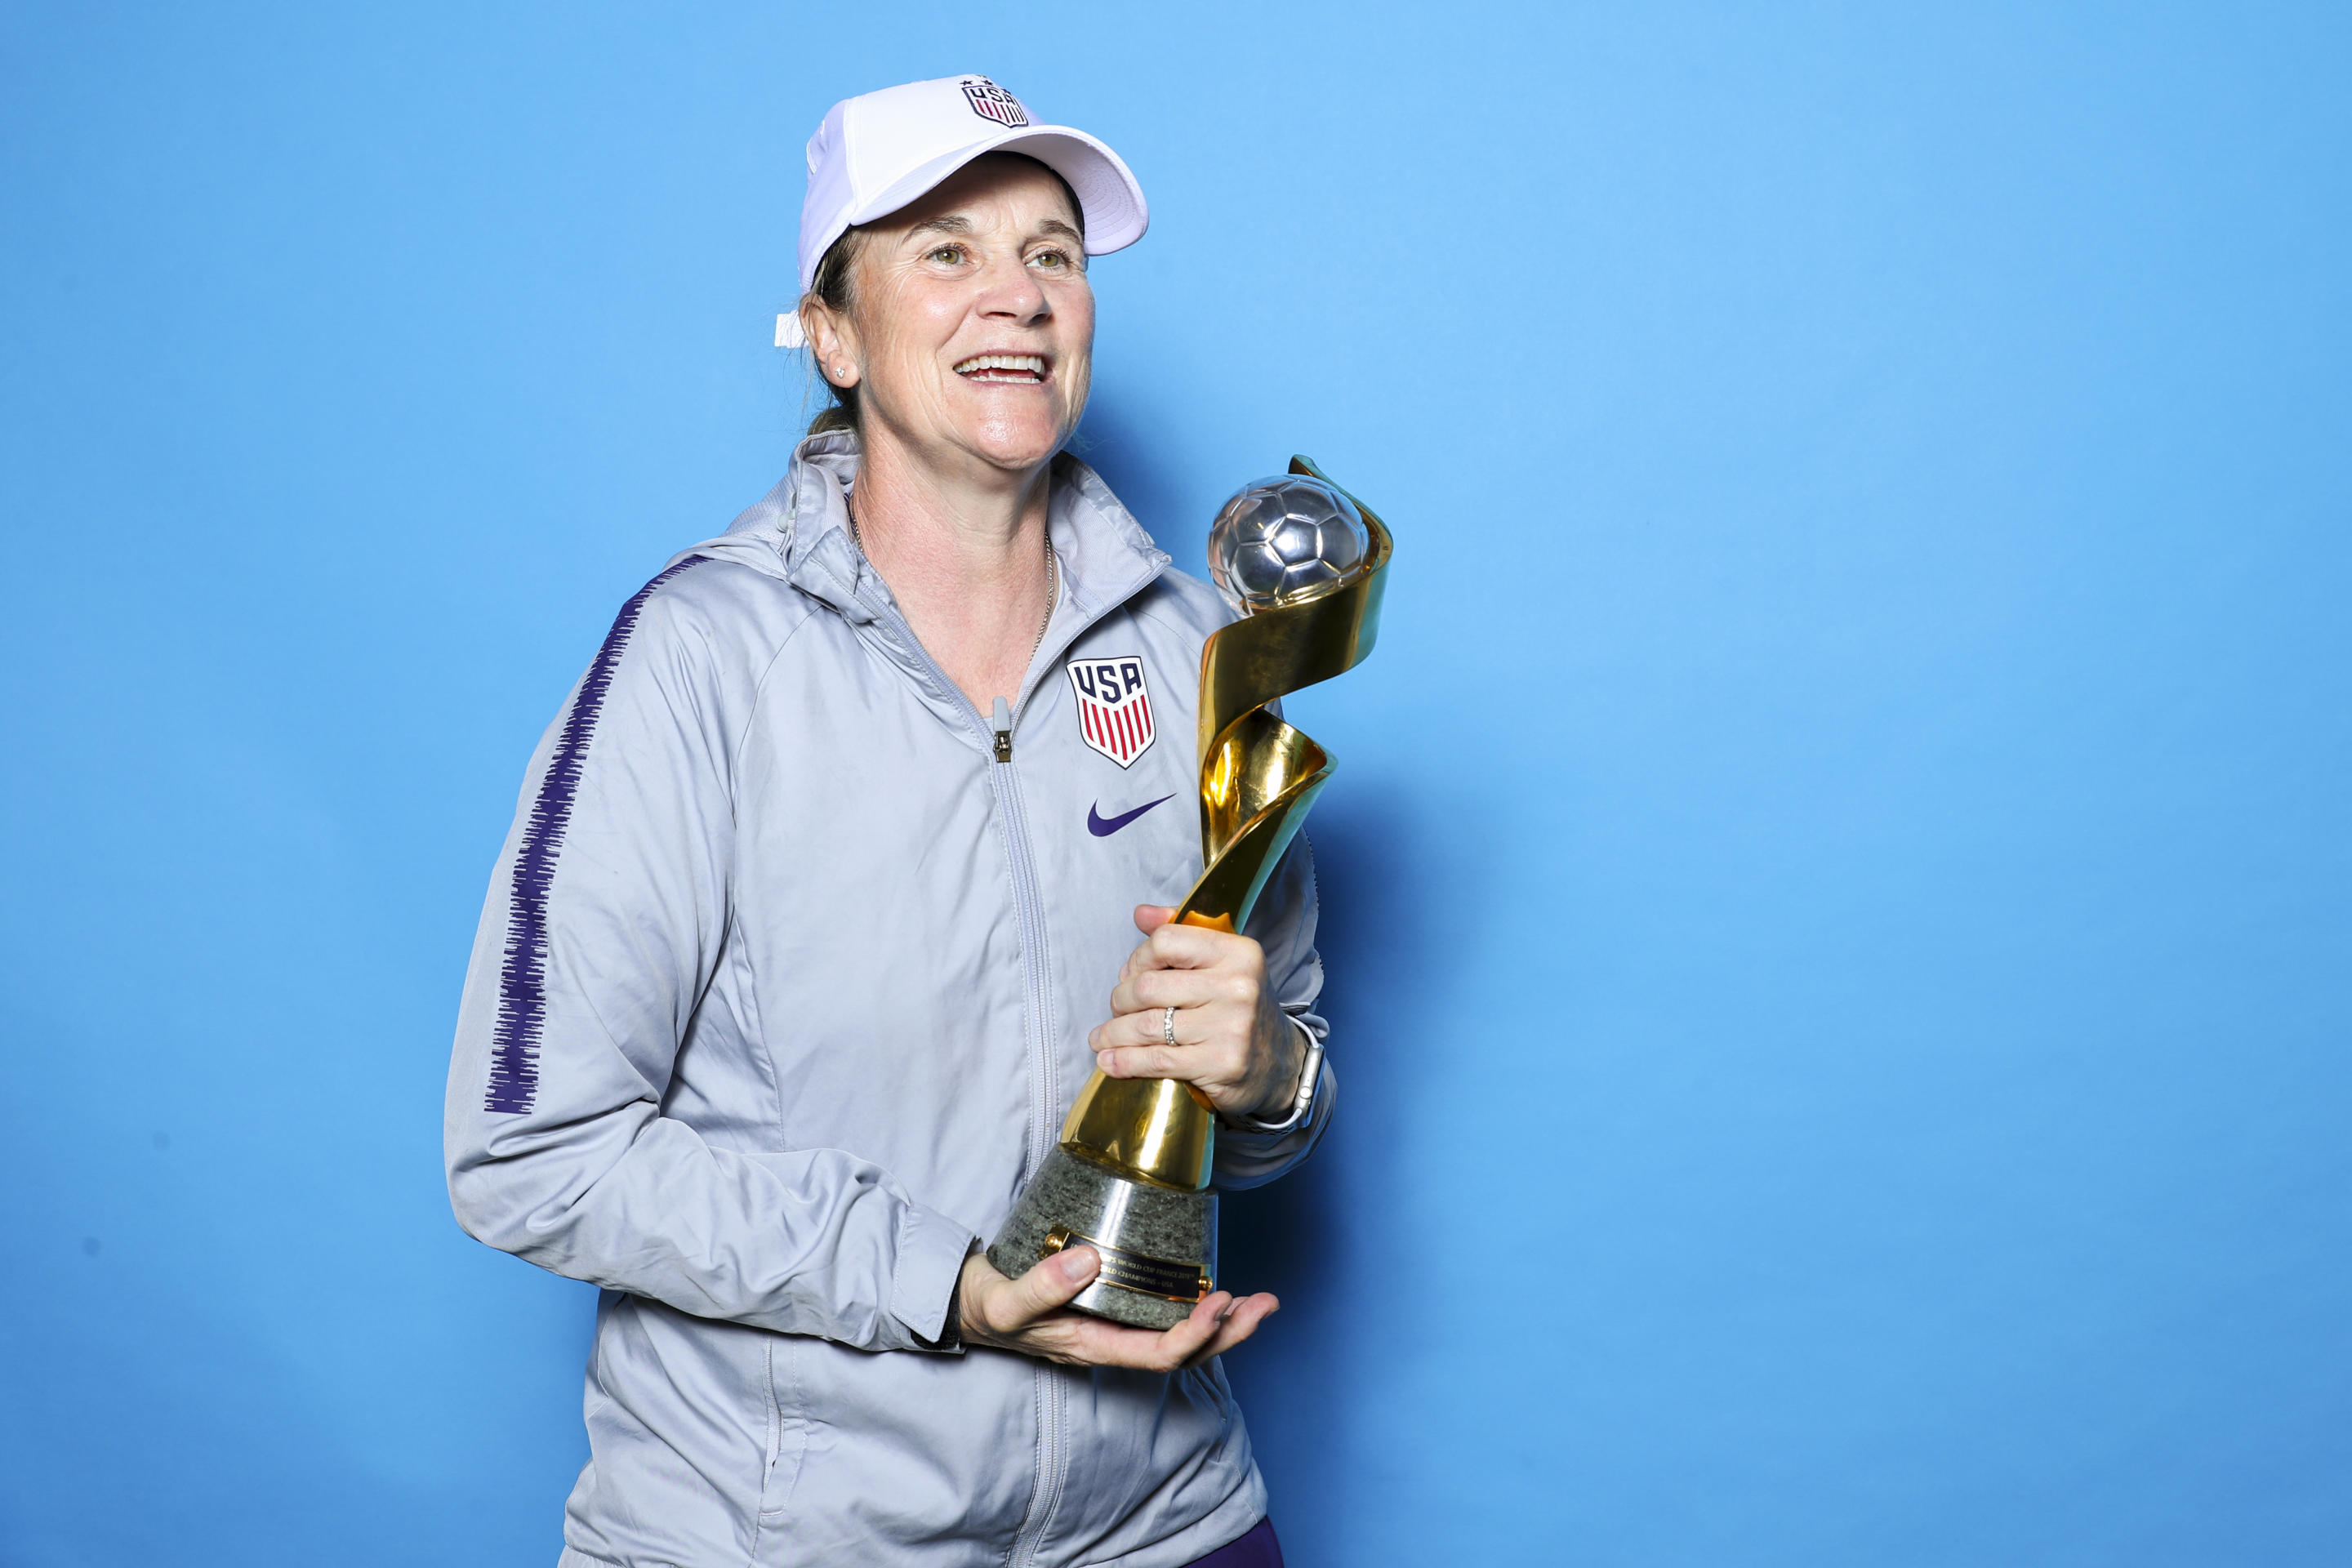 LYON, FRANCE - JULY 07: Coach of the USA, Jill Ellis of the USA poses with the Women's World Cup trophy after the 2019 FIFA Women's World Cup France Final match between The United State of America and The Netherlands at Stade de Lyon on July 07, 2019 in Lyon, France. (Photo by Naomi Baker - FIFA/FIFA via Getty Images)